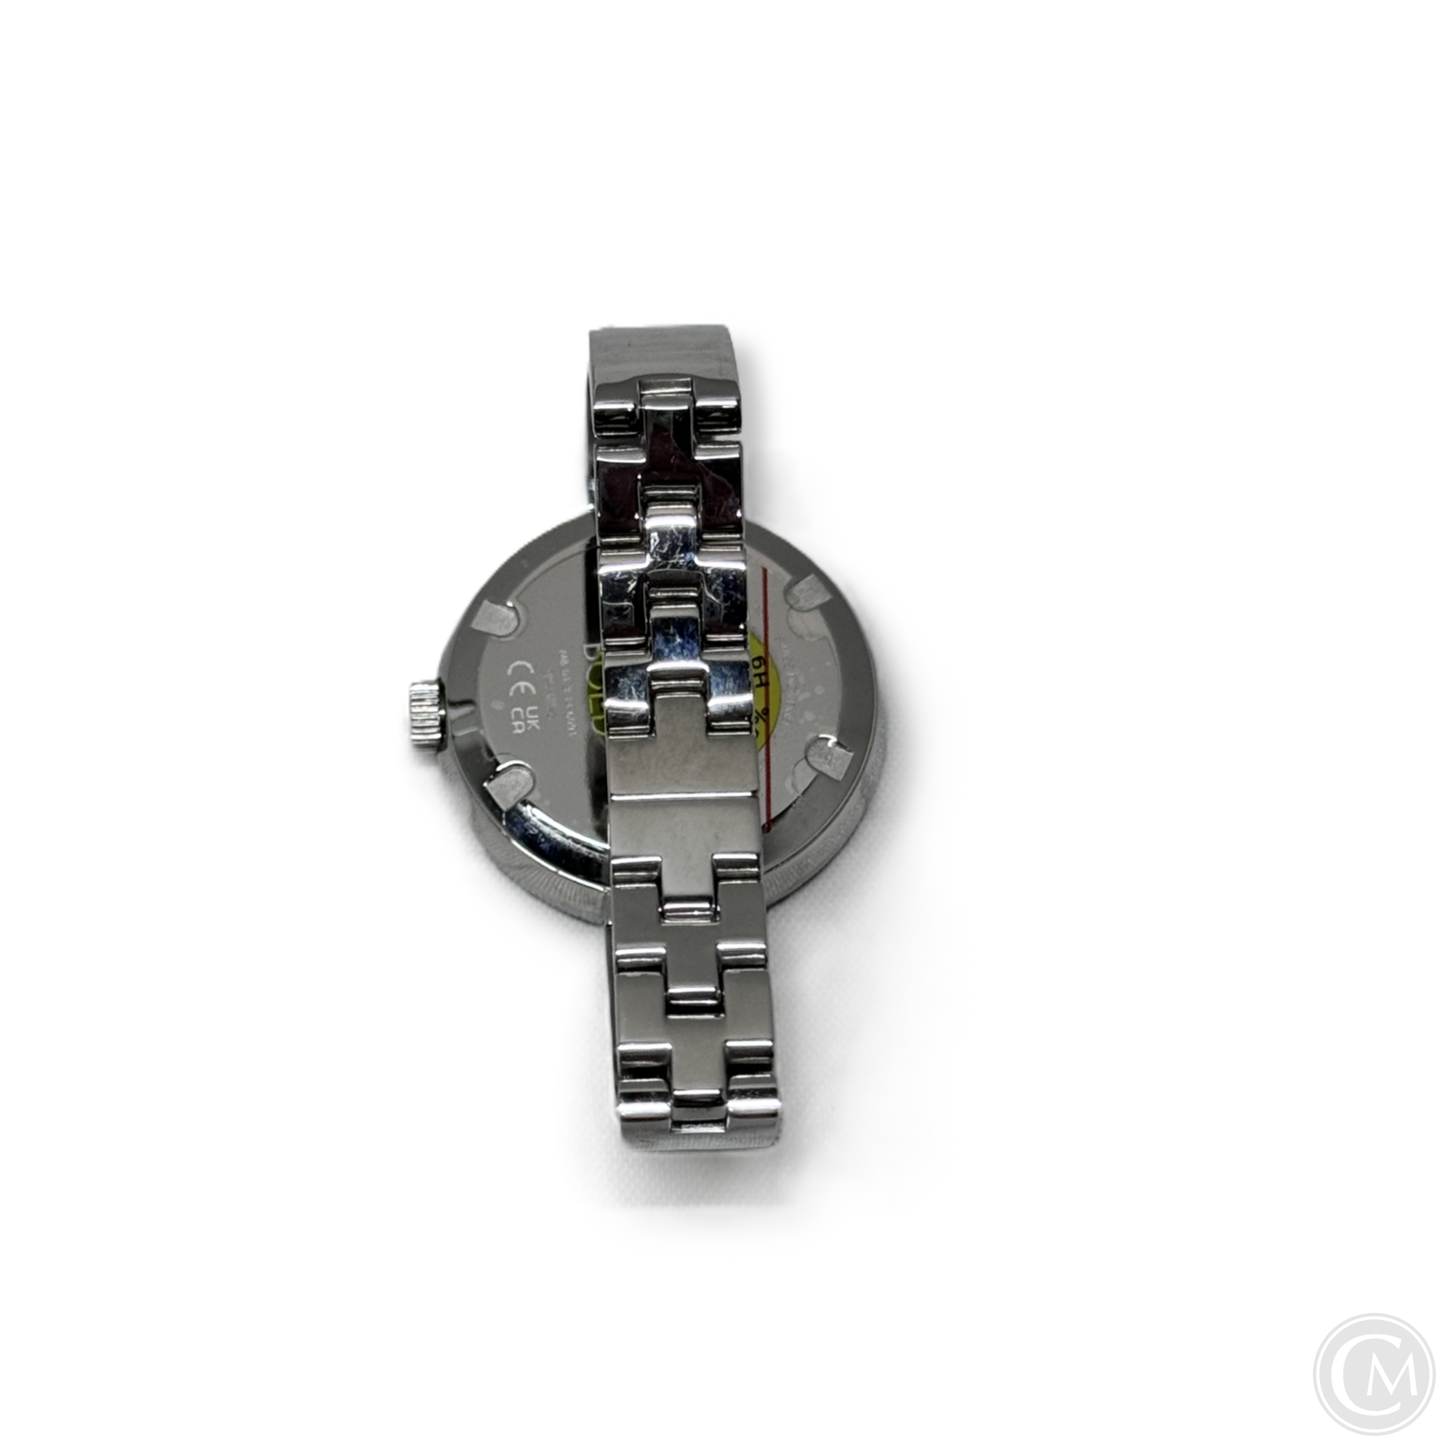 Watch By Movado